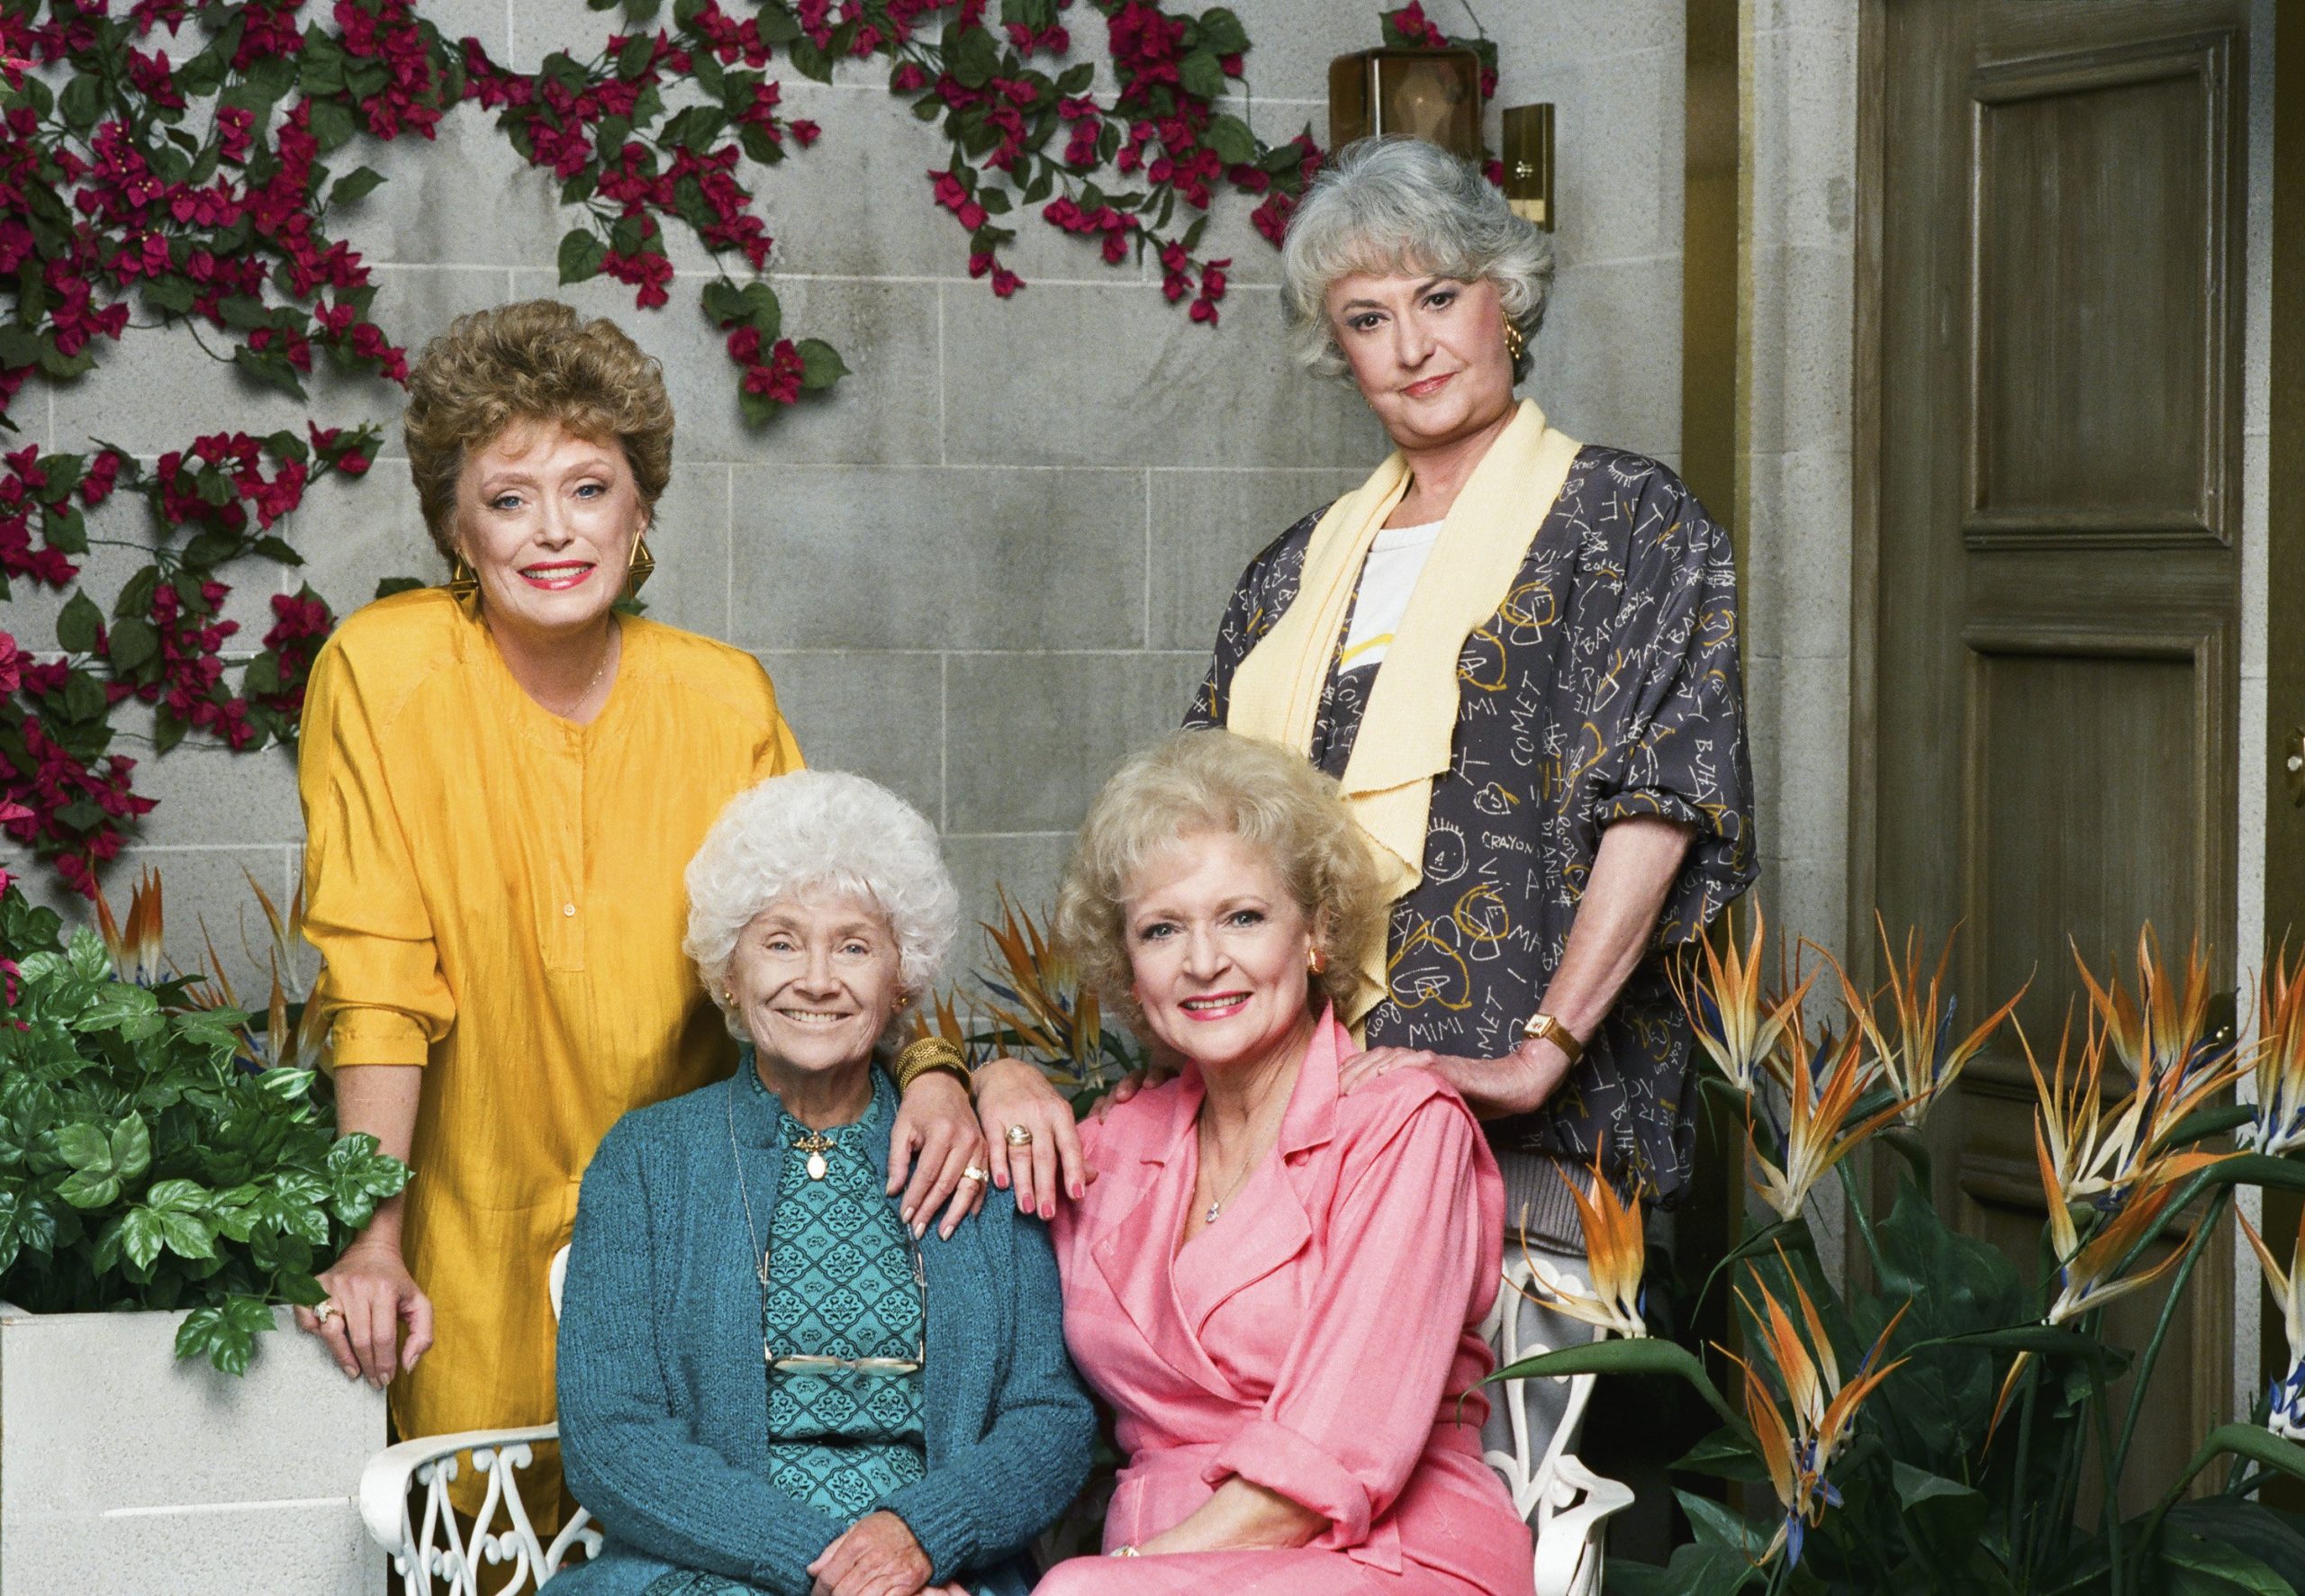 The cast of the NBC comedy 'The Golden Girls': Rue McClanahan, Estelle Getty, Betty White, and Bea Arthur